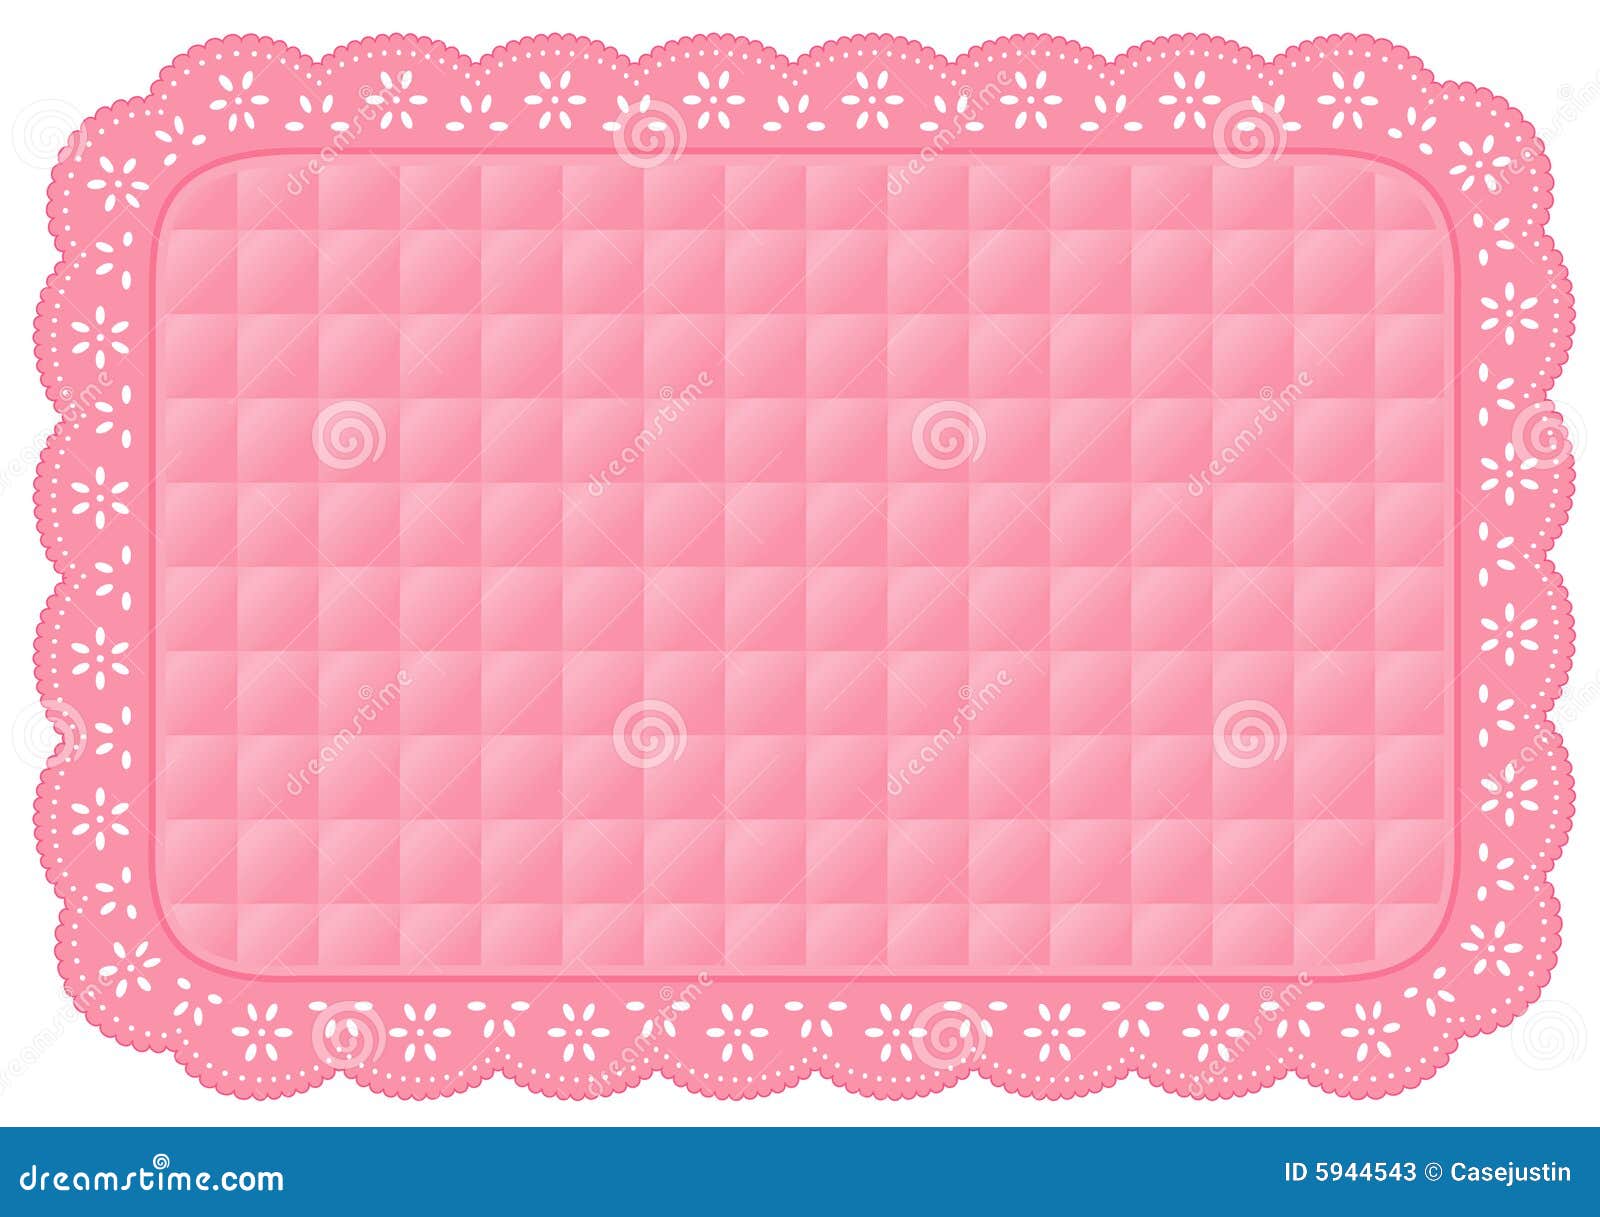 lace place mat, pink quilted eyelet